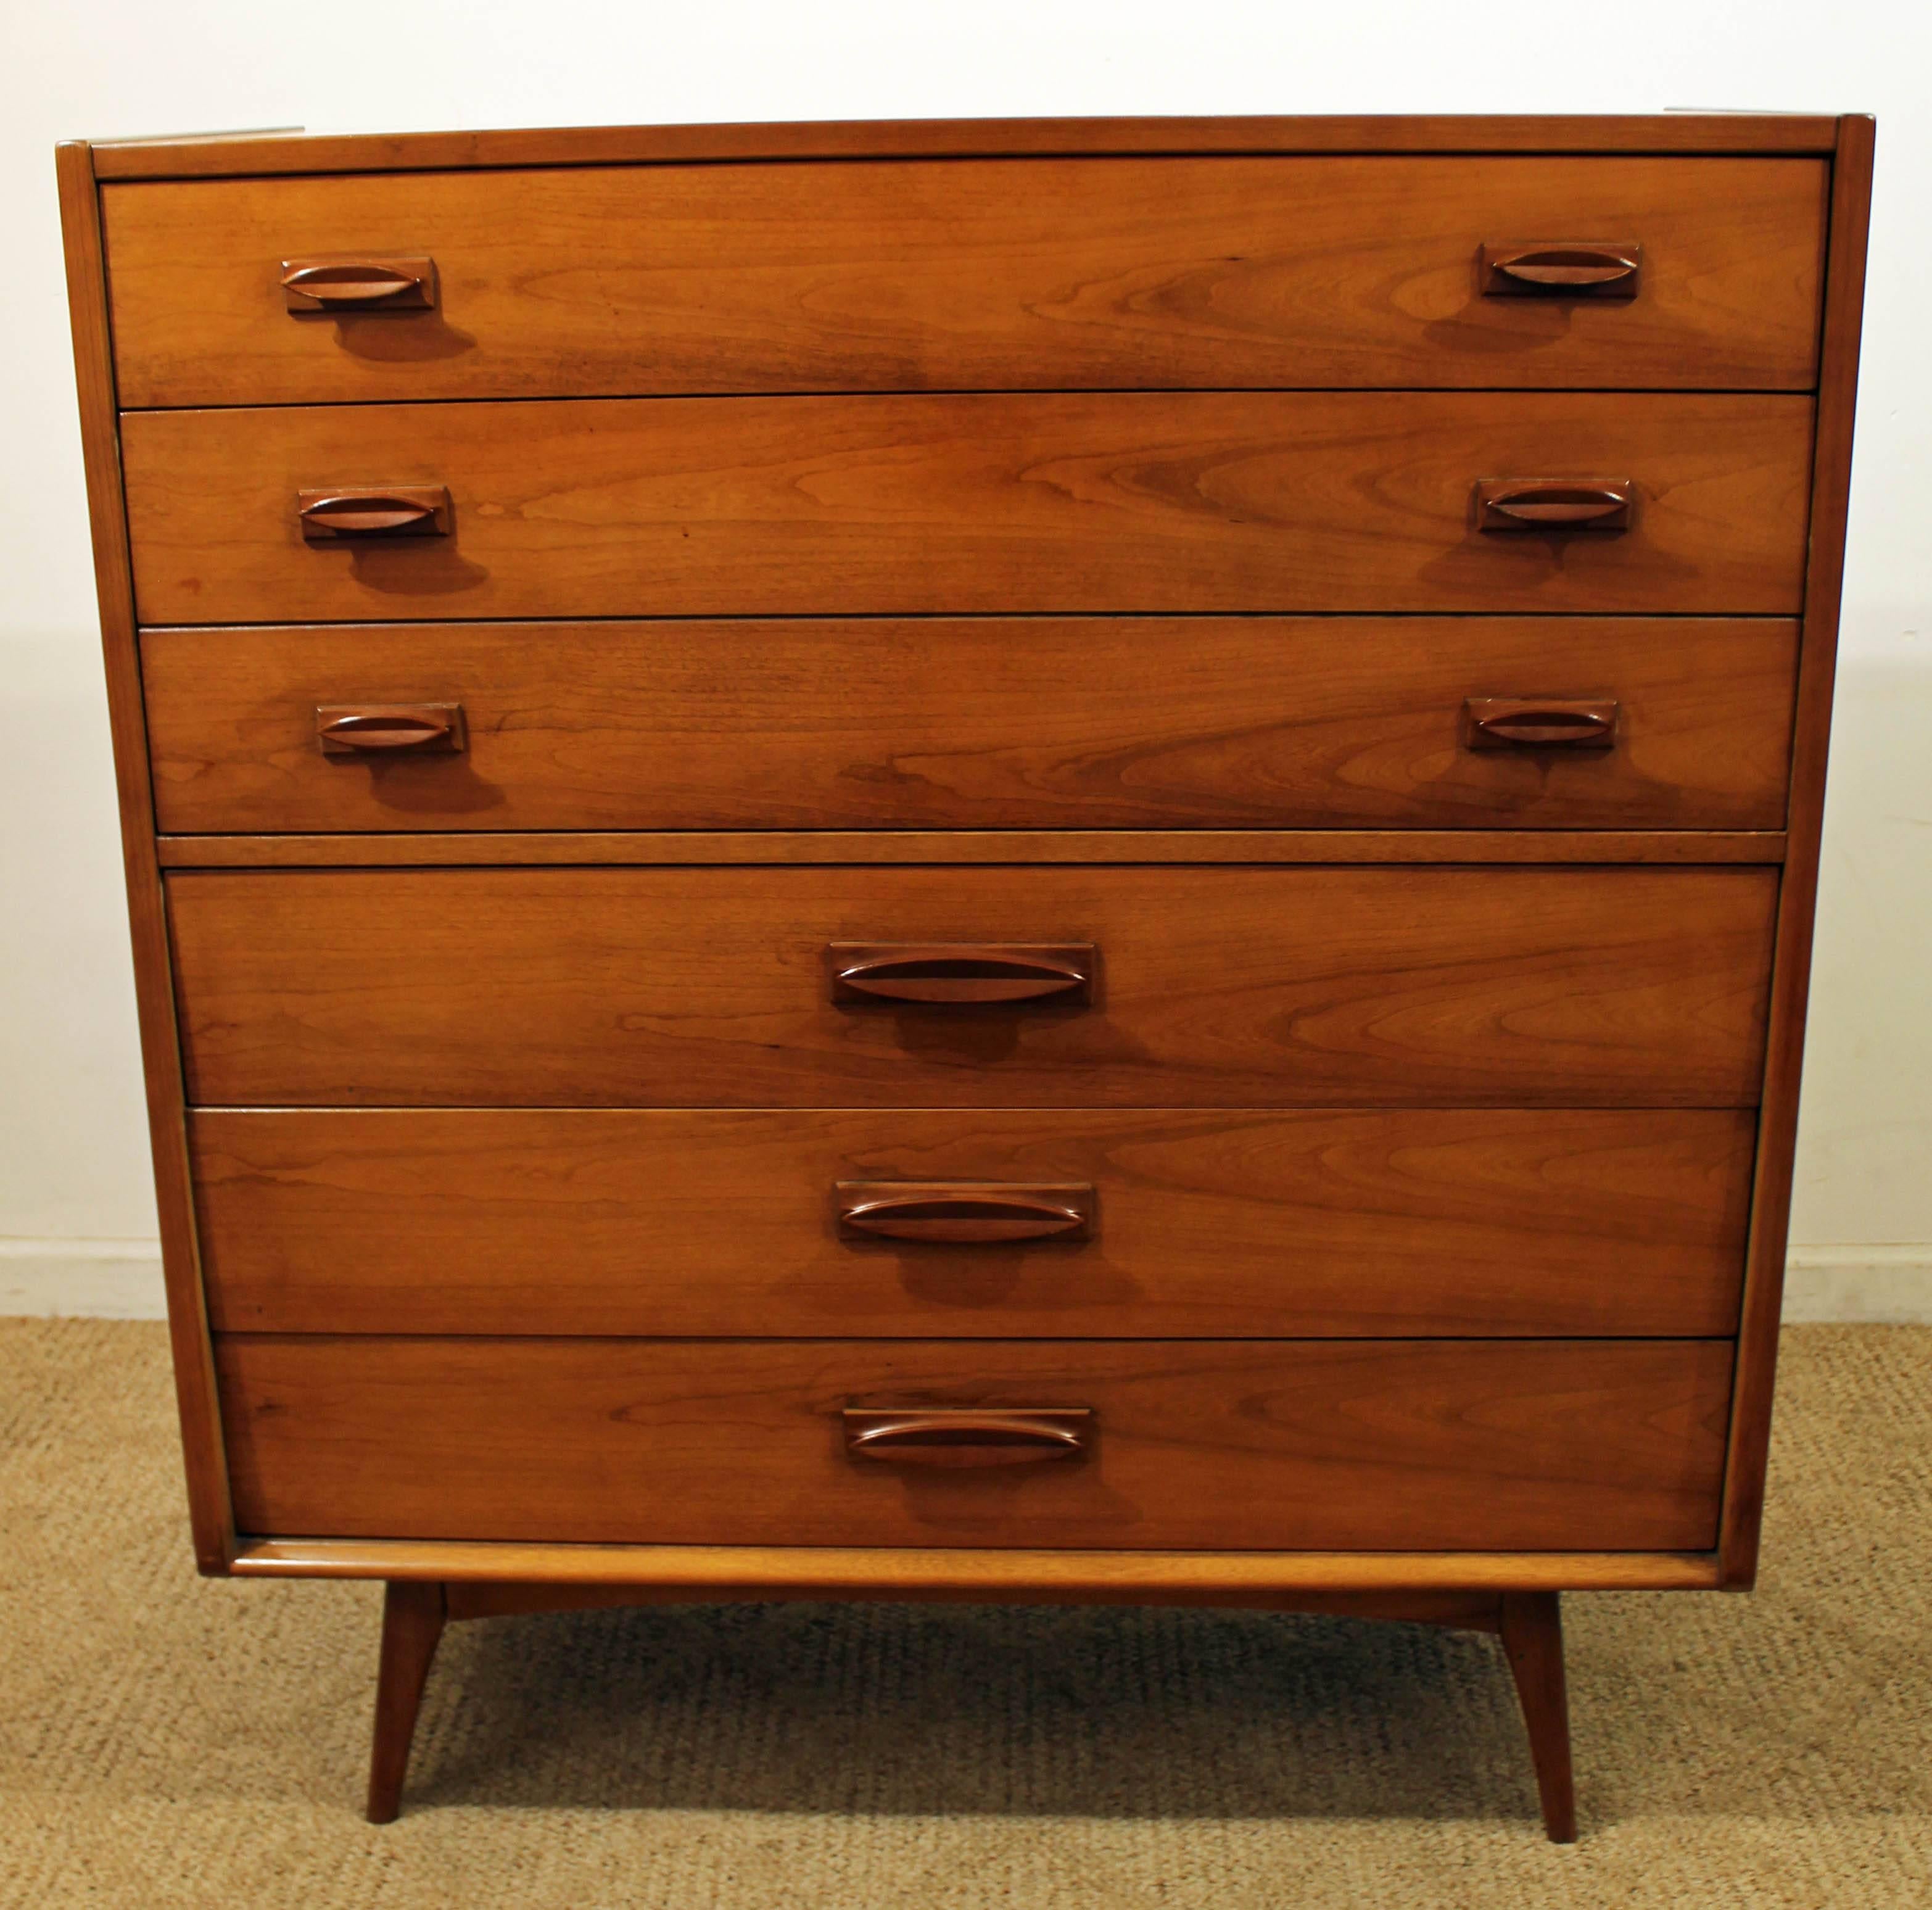 Offered is a Mid-Century Modern tall chest. We are unsure of the wood type. It features 5 dovetails drawers (including one double drawer). It is in excellent condition, shows minor signs of wear. It is signed by United. Check out our other listings